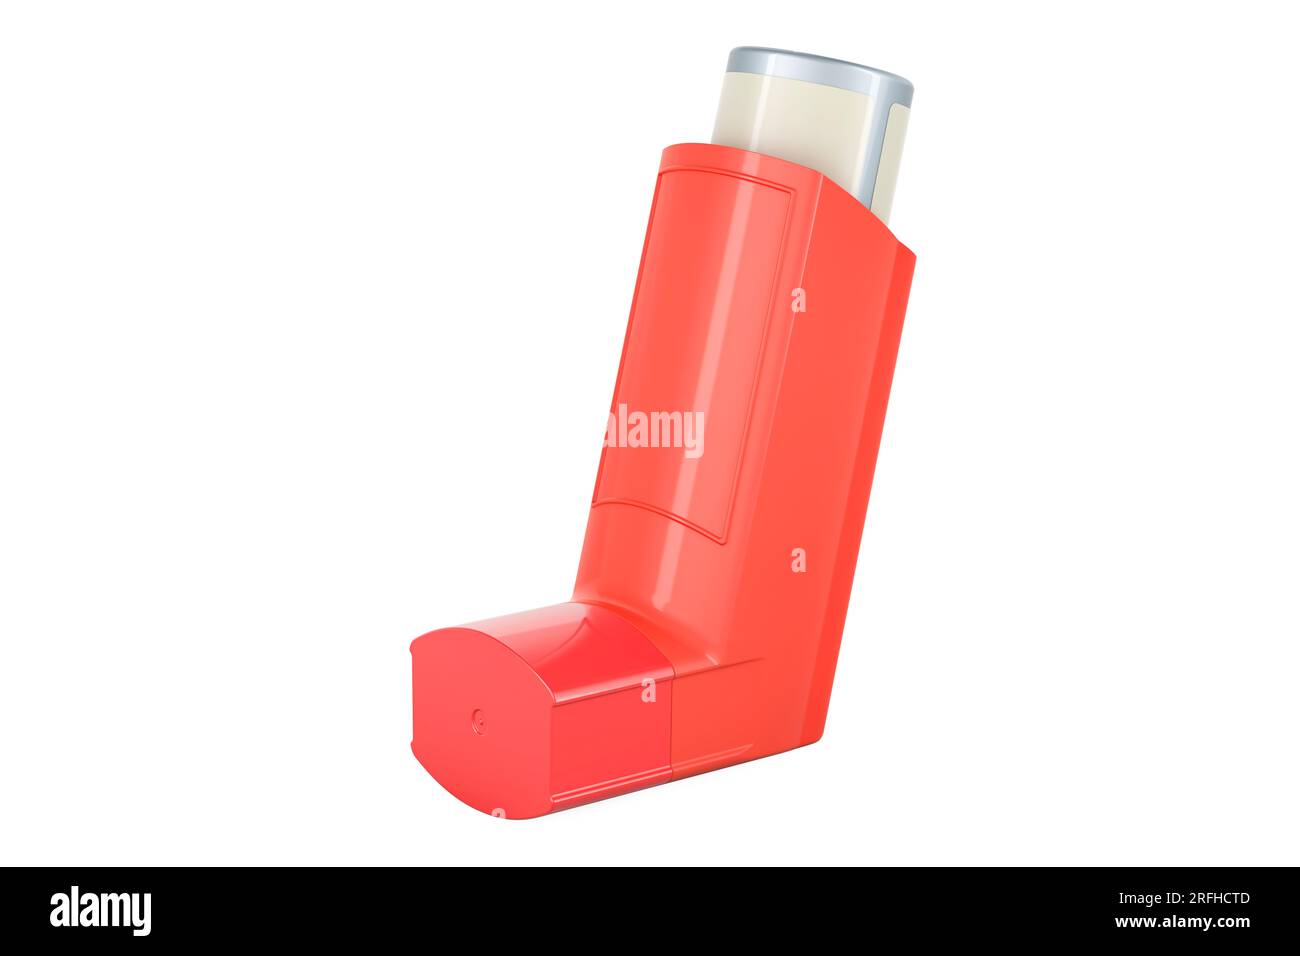 Metered-dose inhaler, 3D rendering isolated on white background Stock Photo